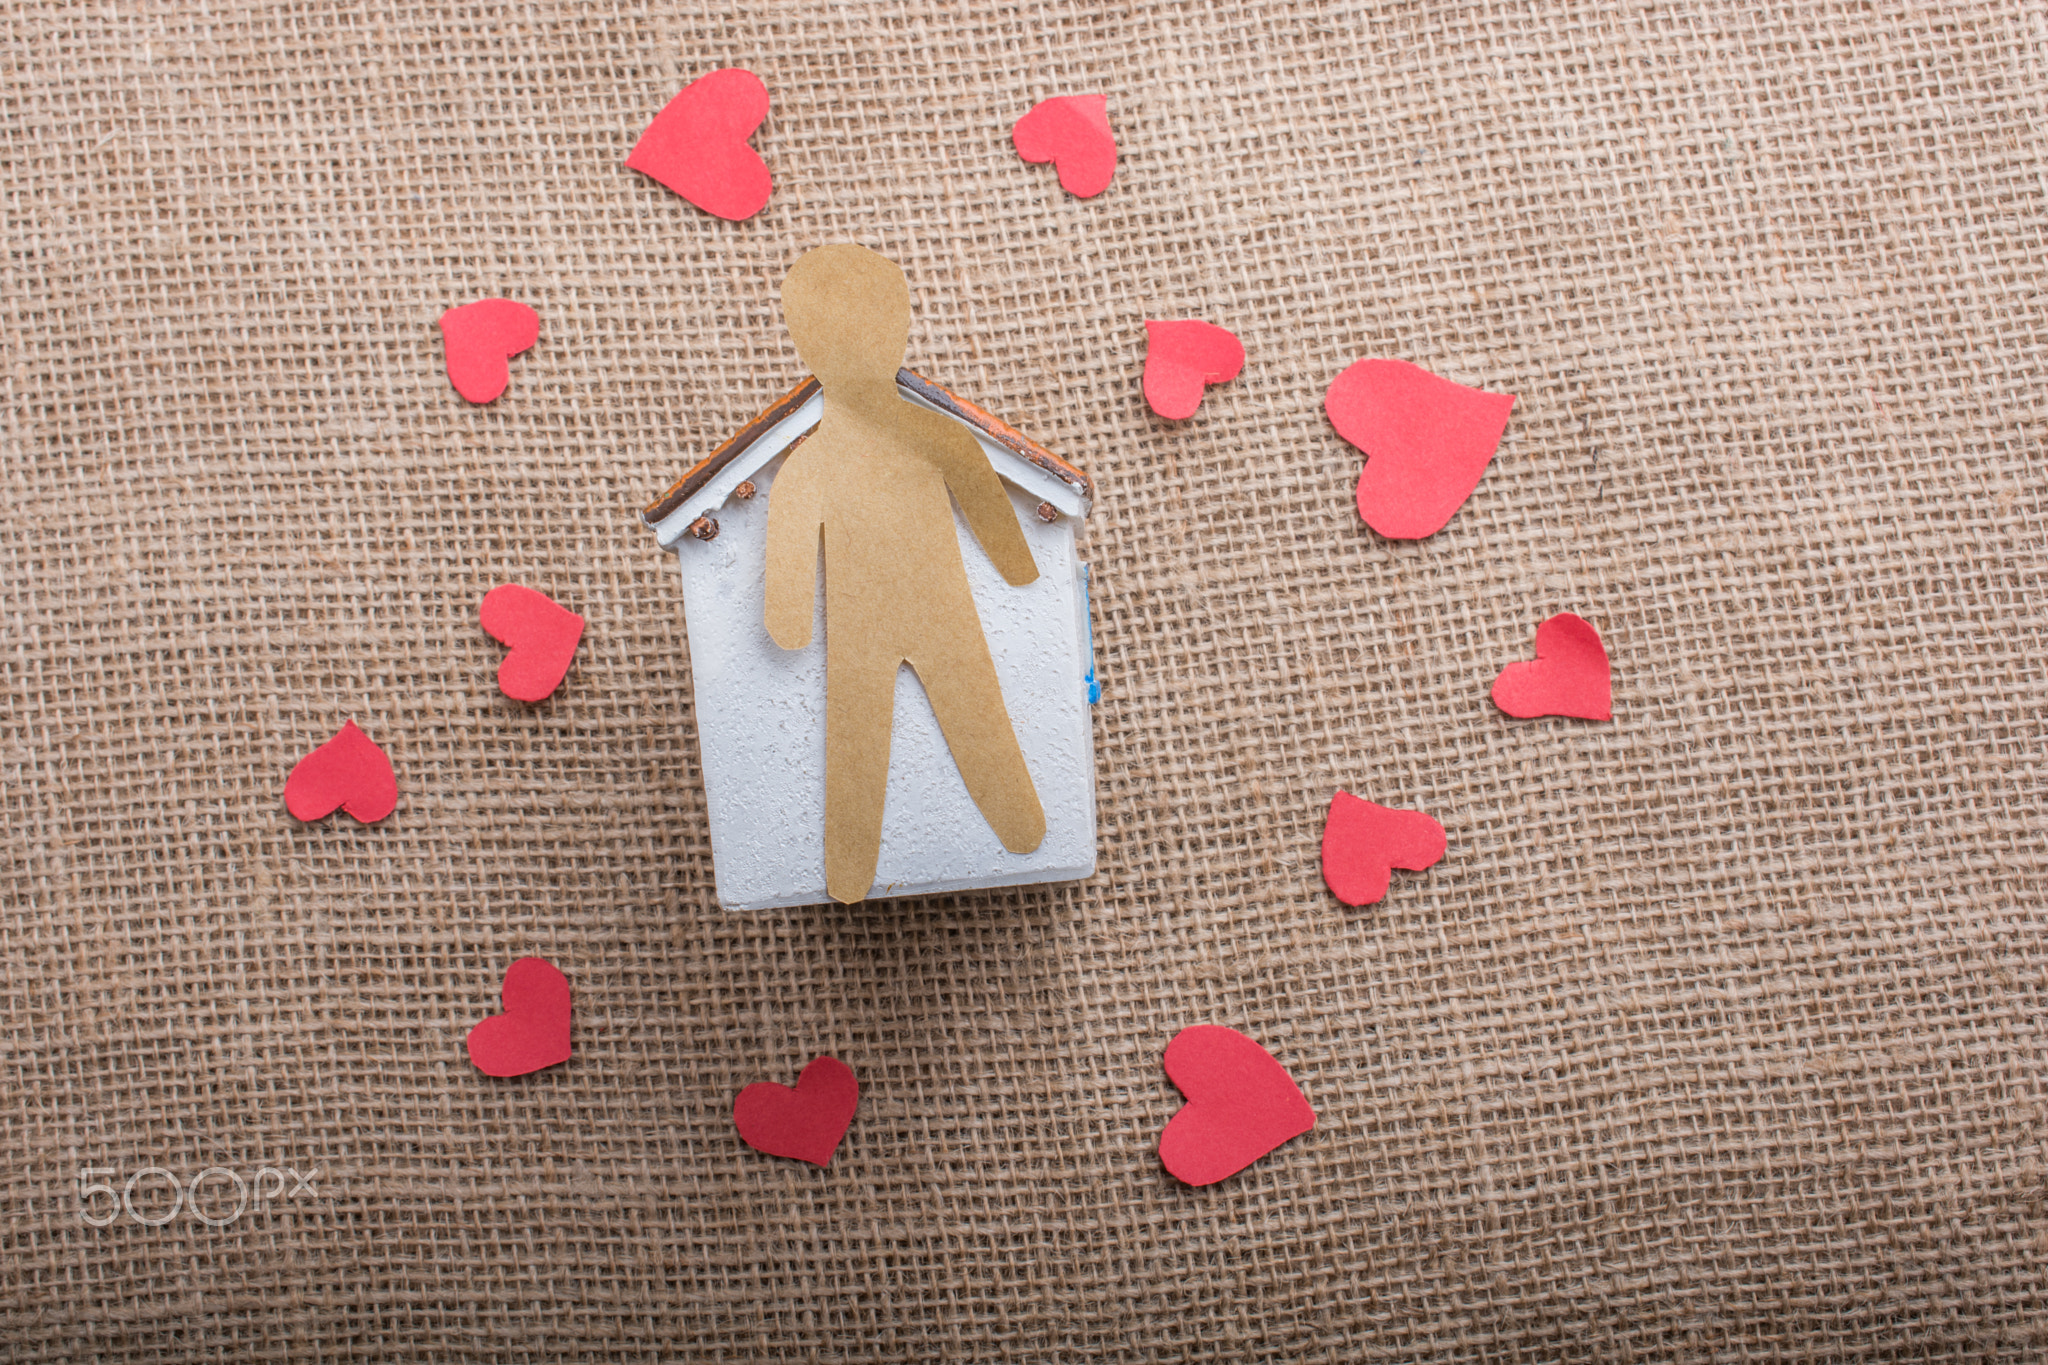 Love concept with paper shaped man, heart and house